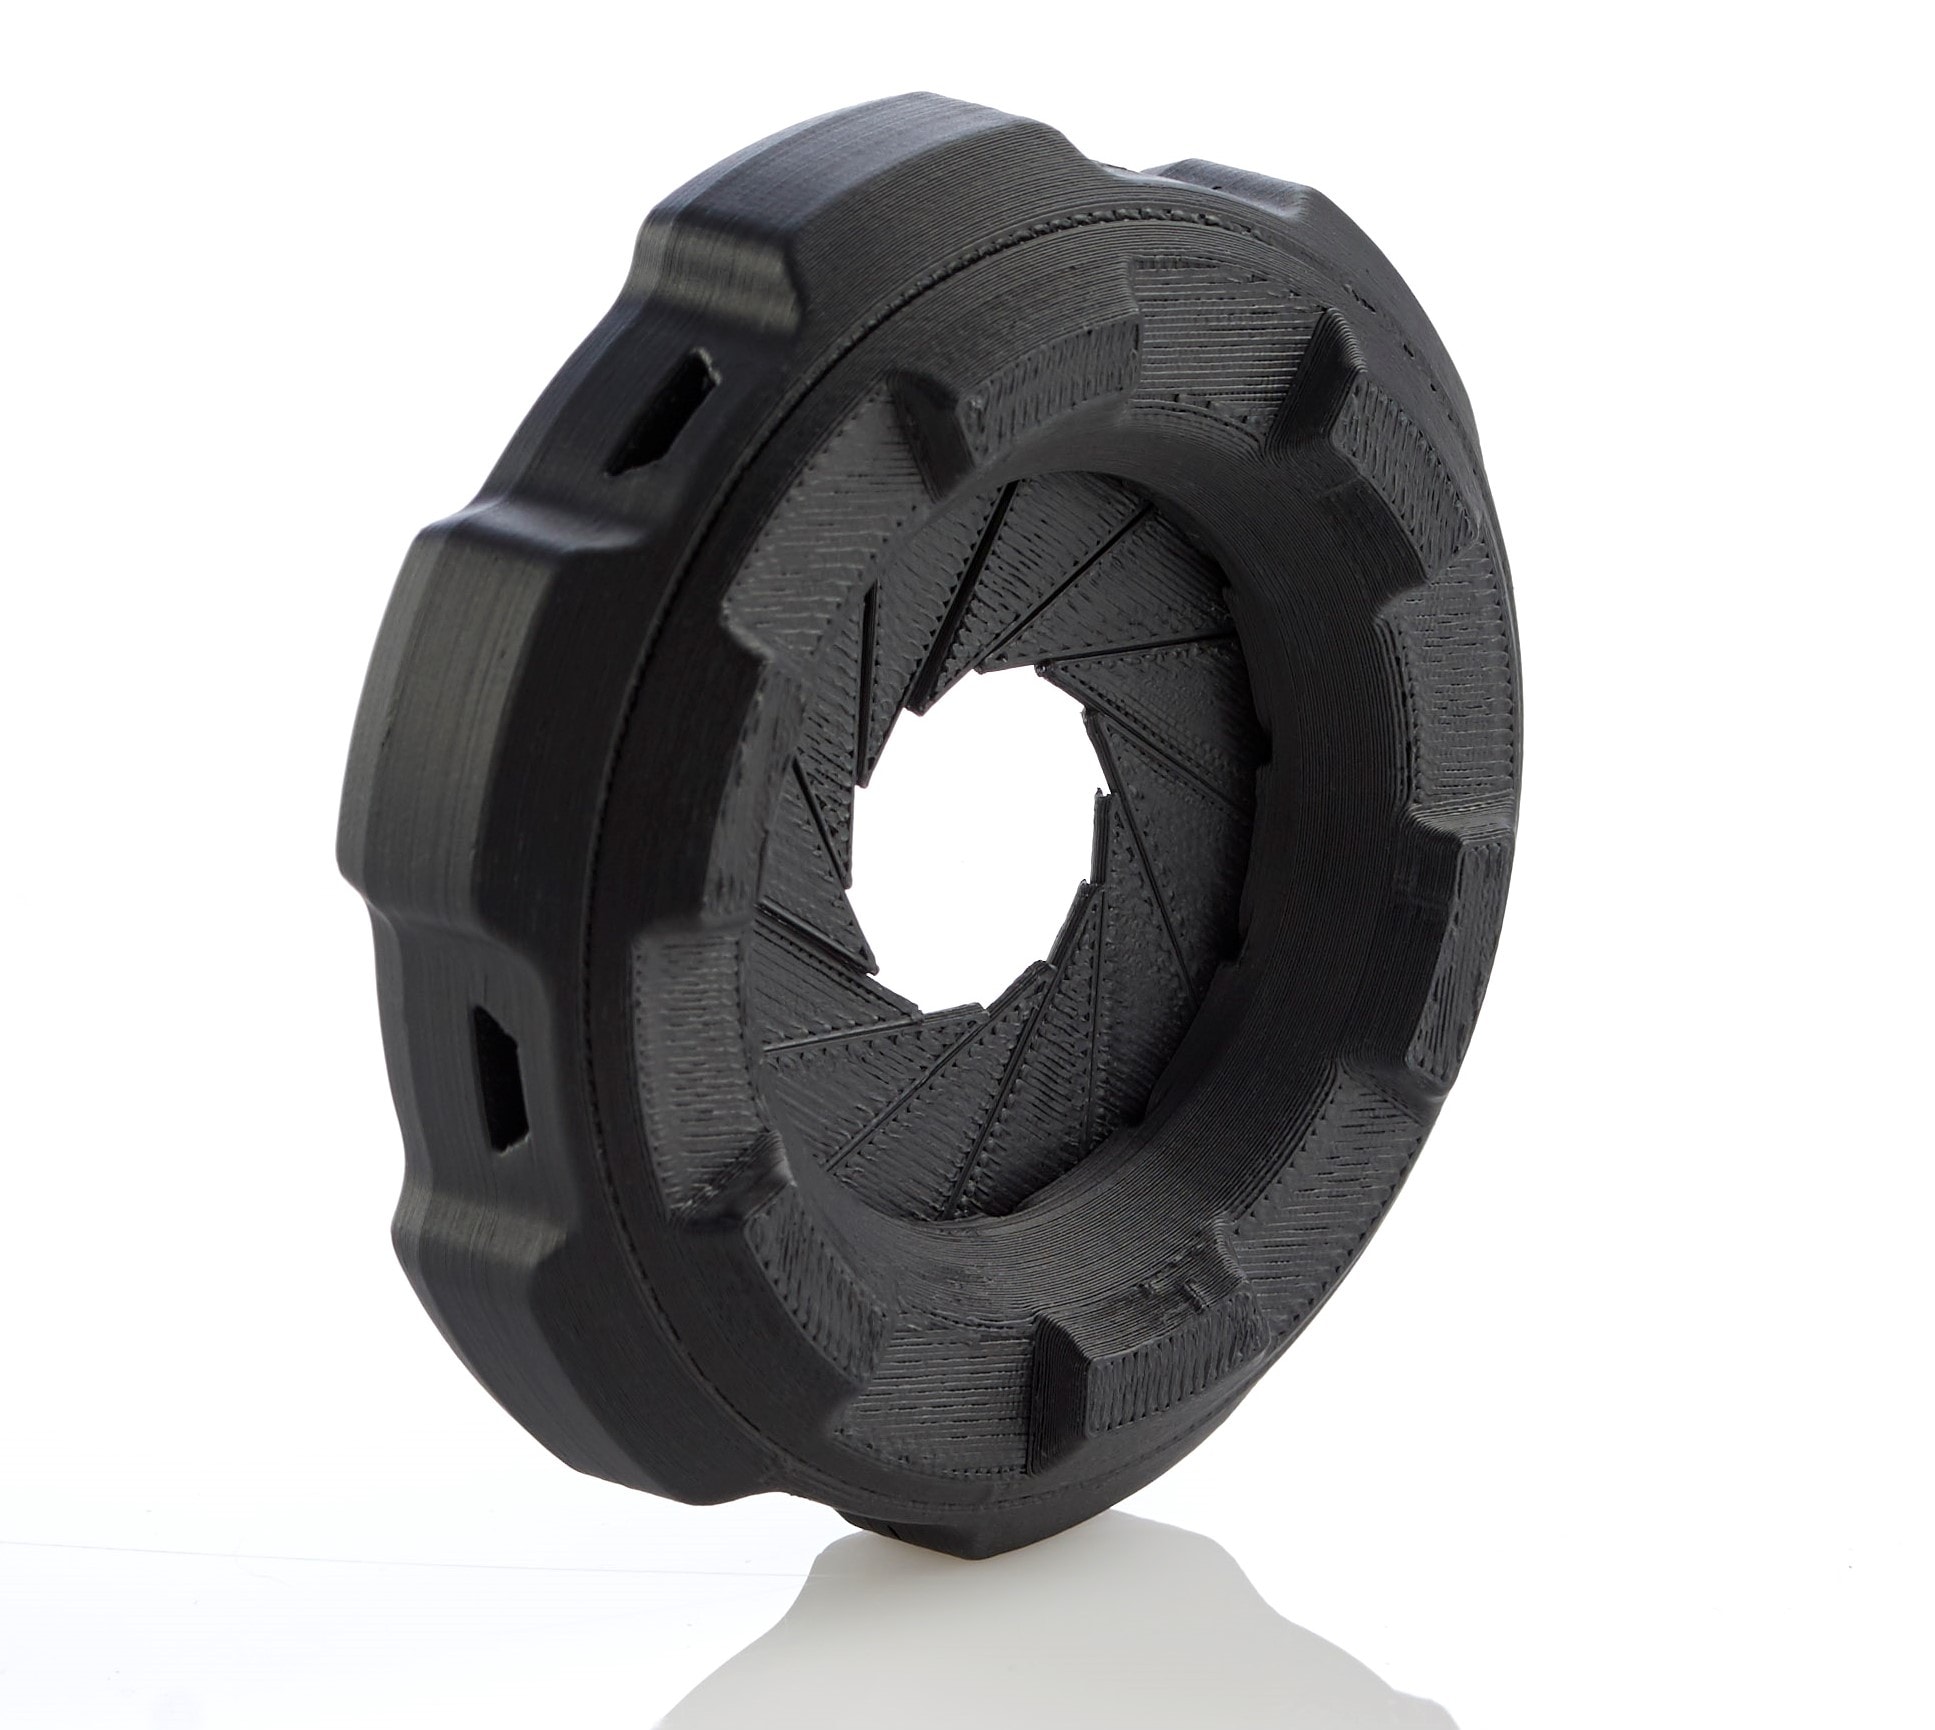 Stratasys FDM 3D printed camera lens-cover with integrated shutter-vanes. Printed in black ASA material. (Image courtesy Stratasys)